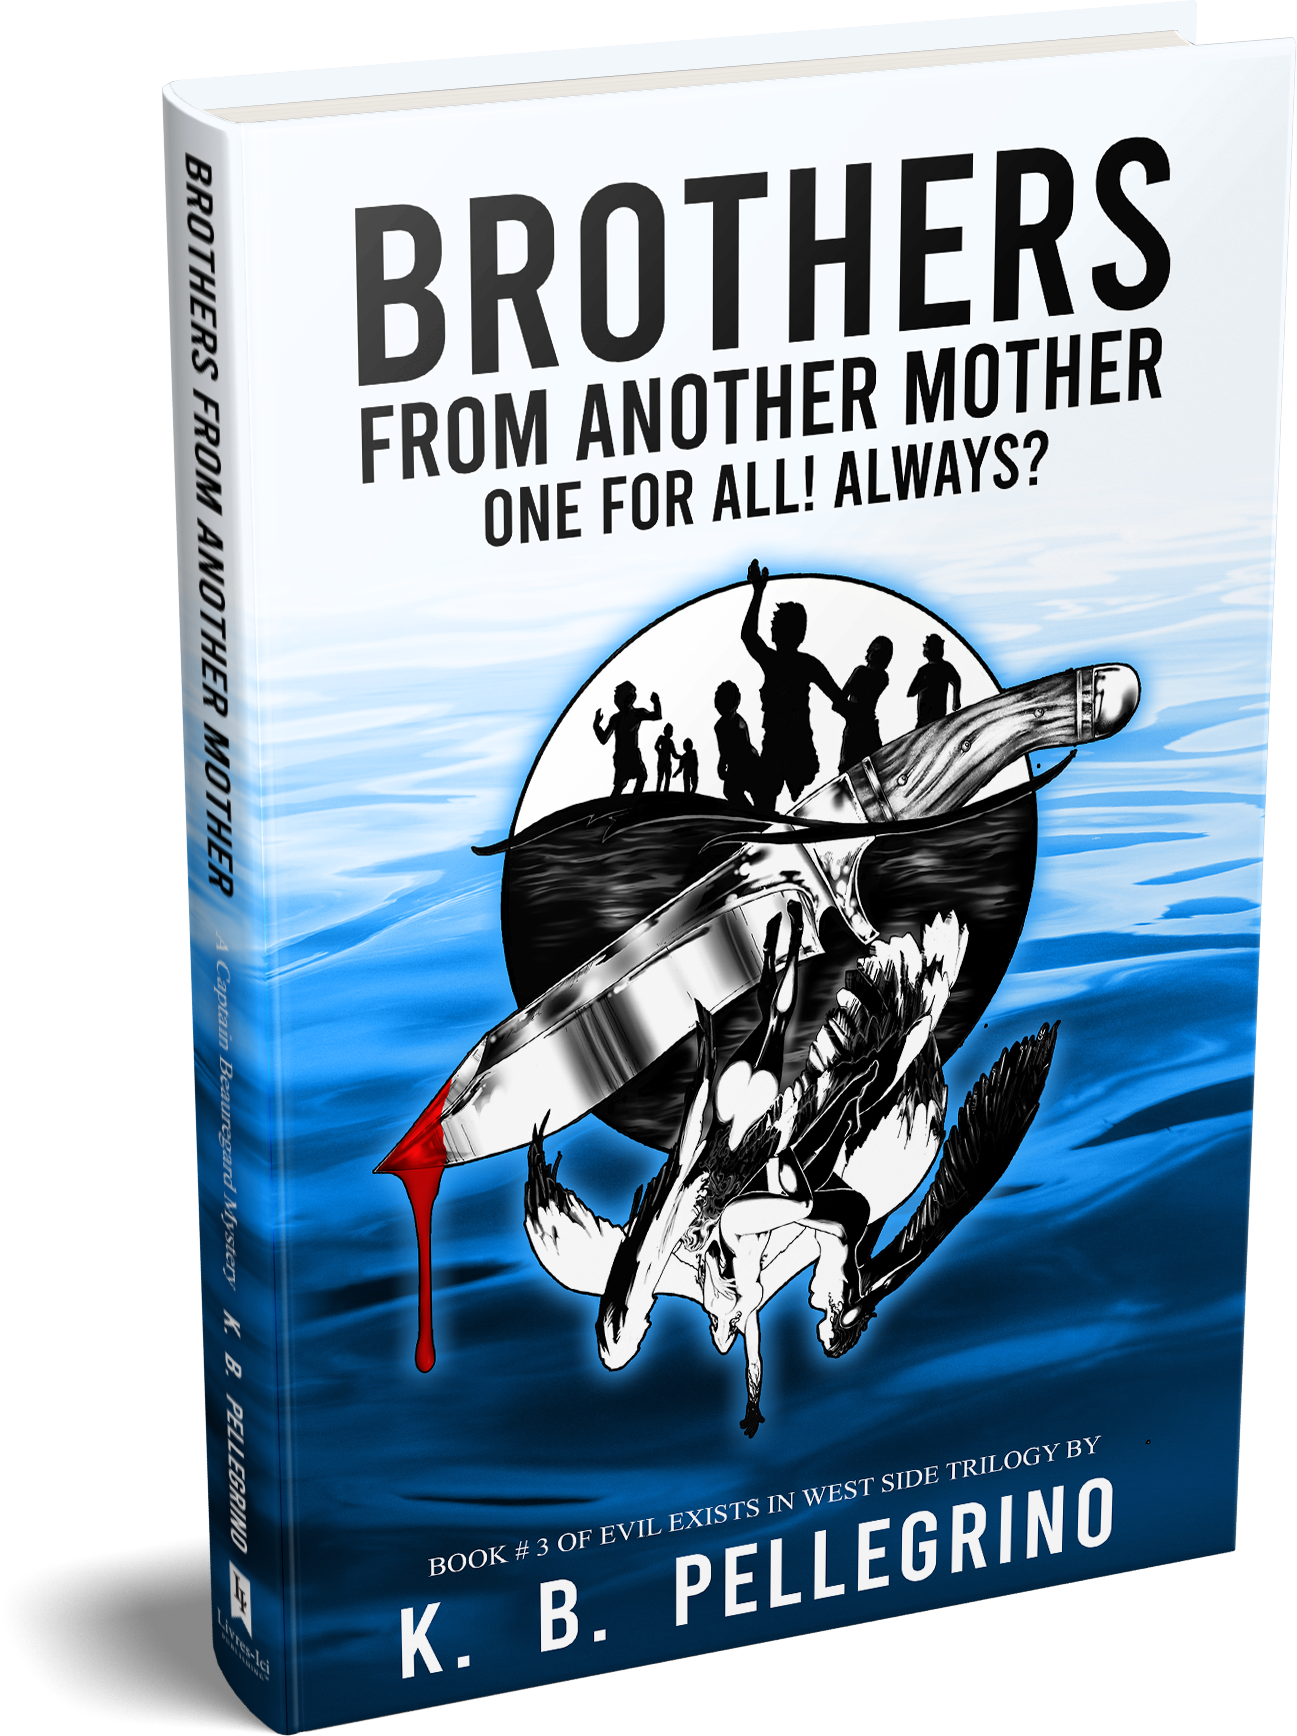 Brothers From Another Mother by K.B. Pellegrino